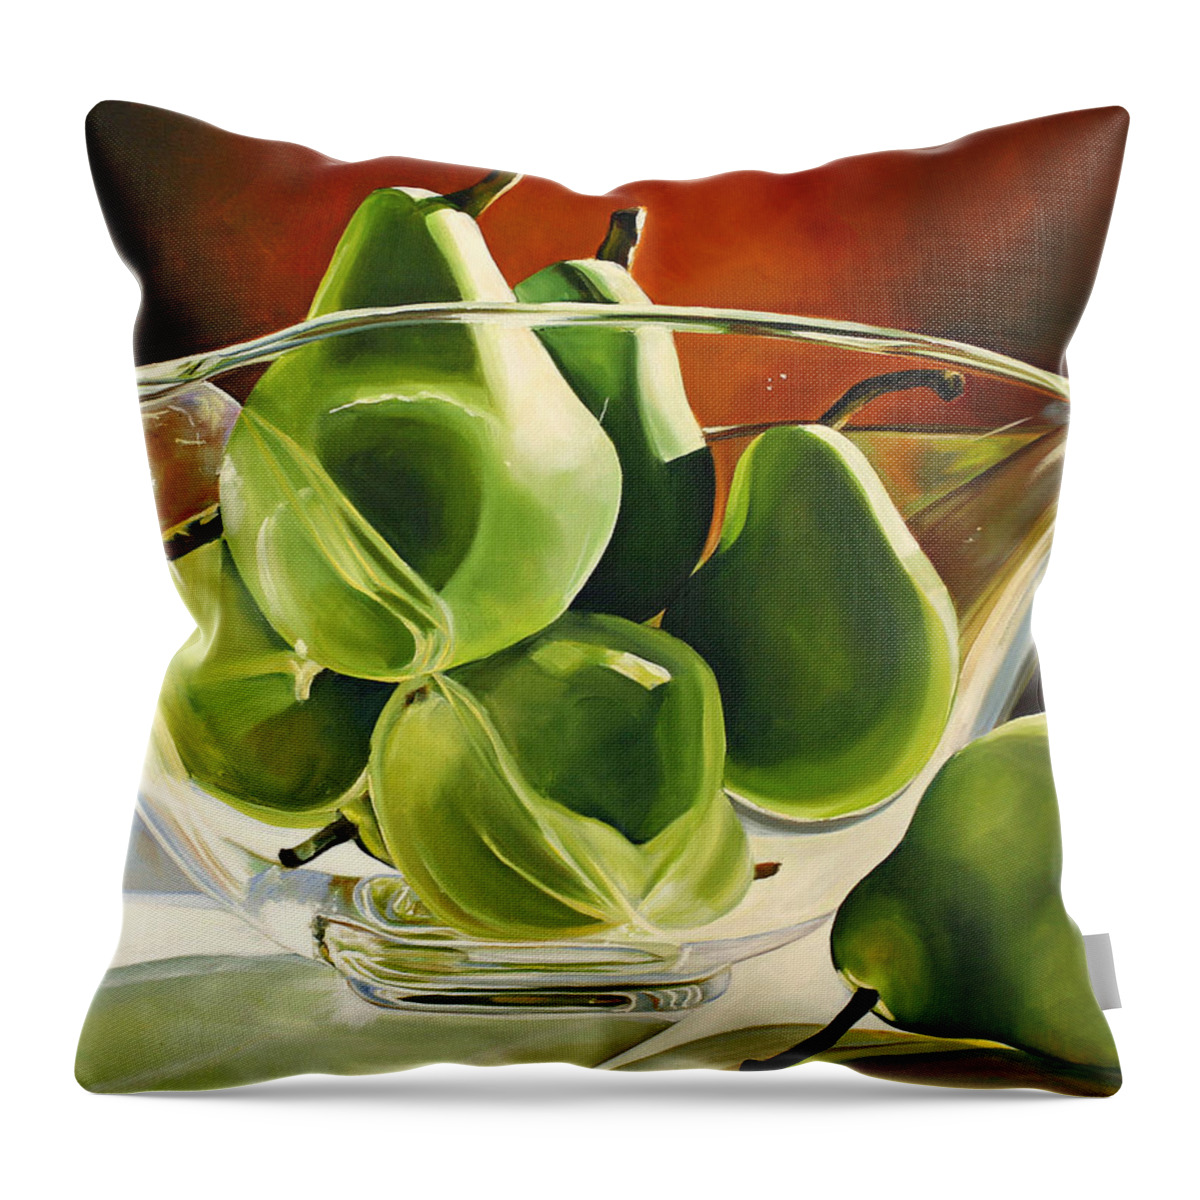 Pear Throw Pillow featuring the painting Green Pears in Glass Bowl by Toni Grote